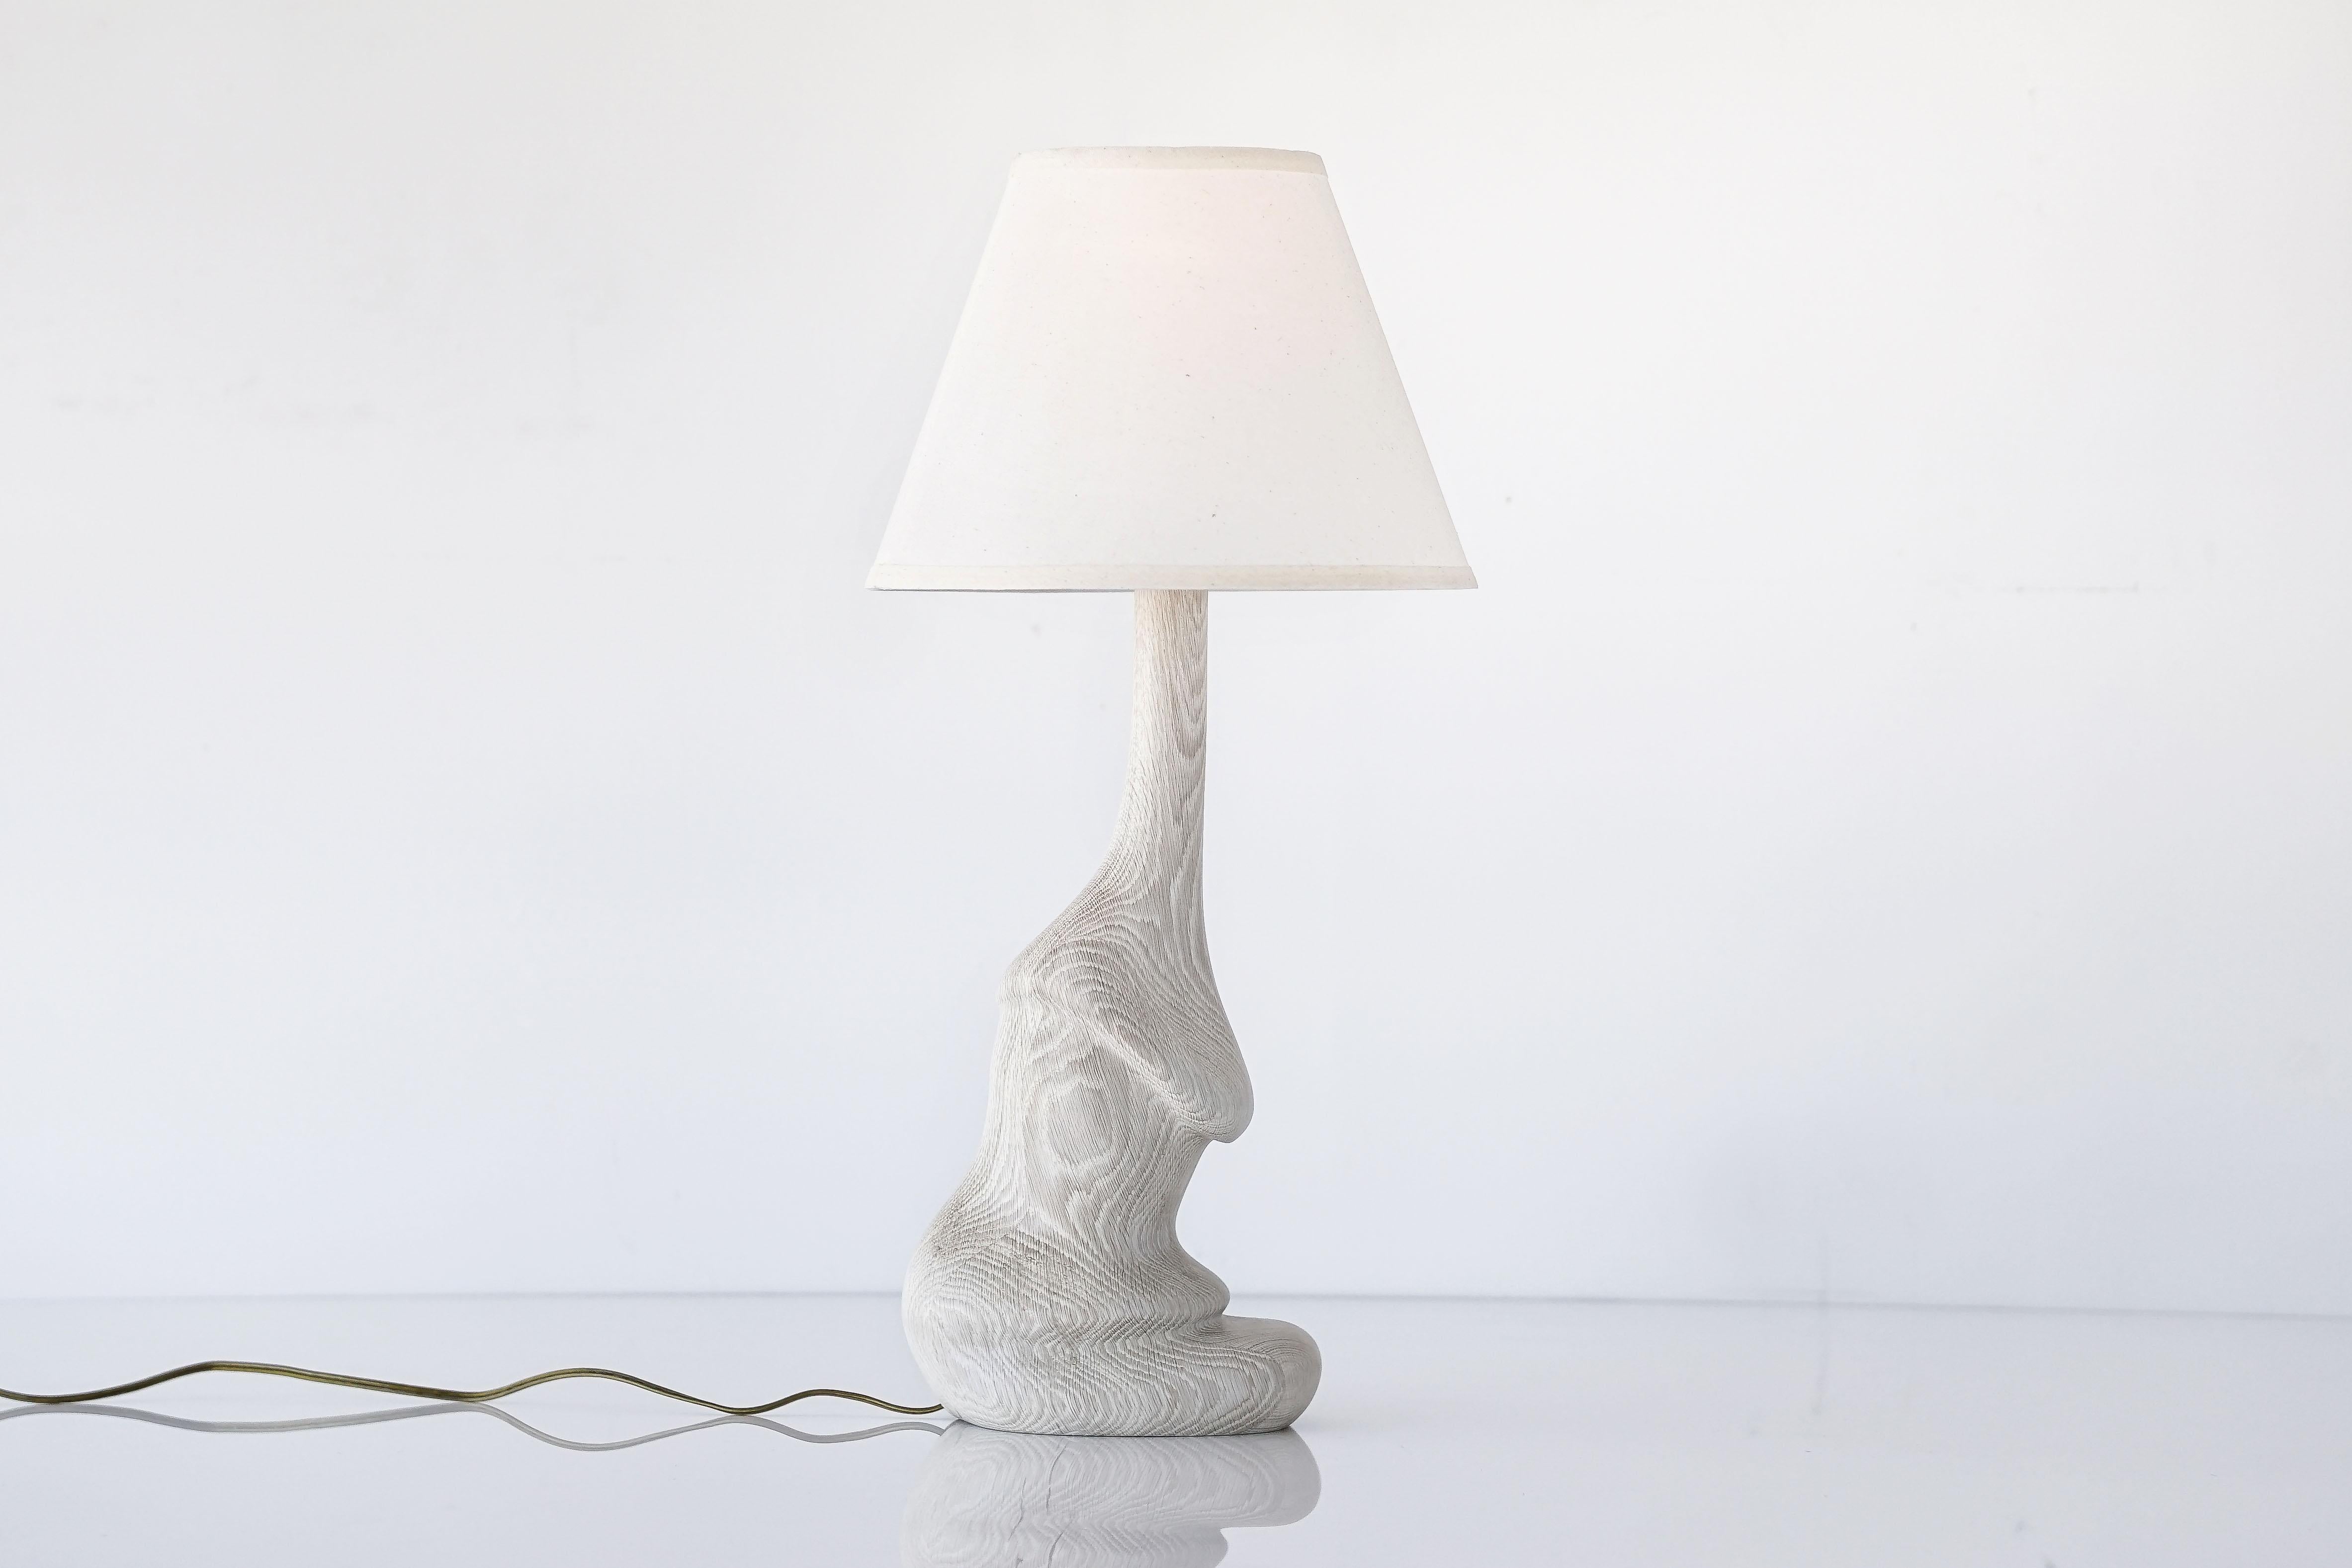 Bleached Carved Solid White Oakwood Fungi Organic Table Lamp with White Linen Lamp Shade For Sale